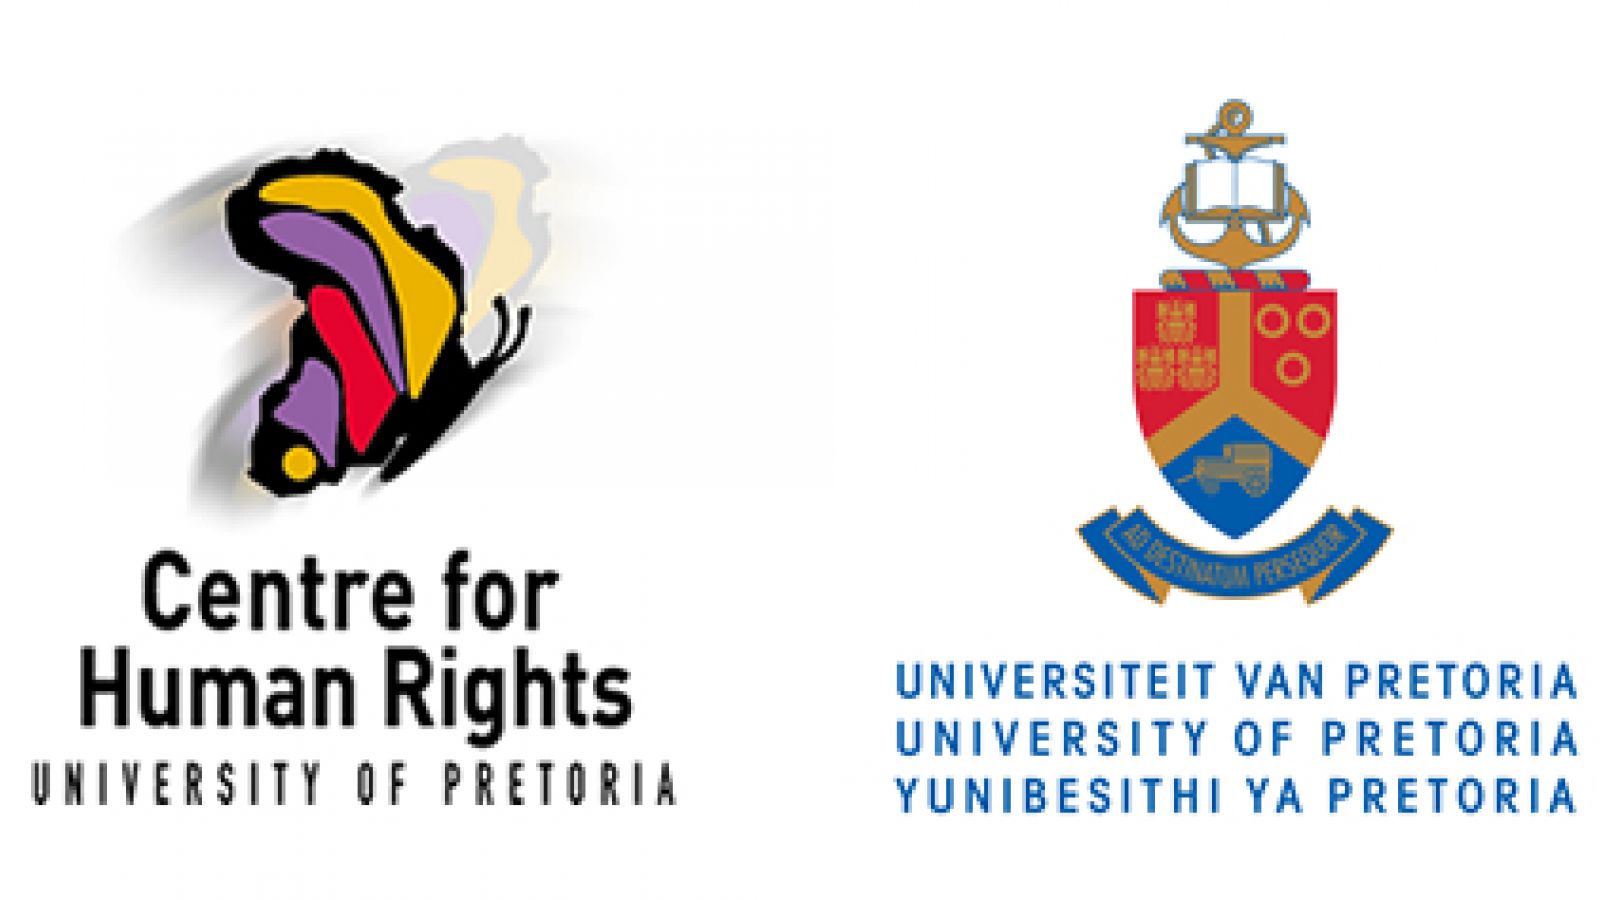 The two organisations involved in running the Right Of Assembly website